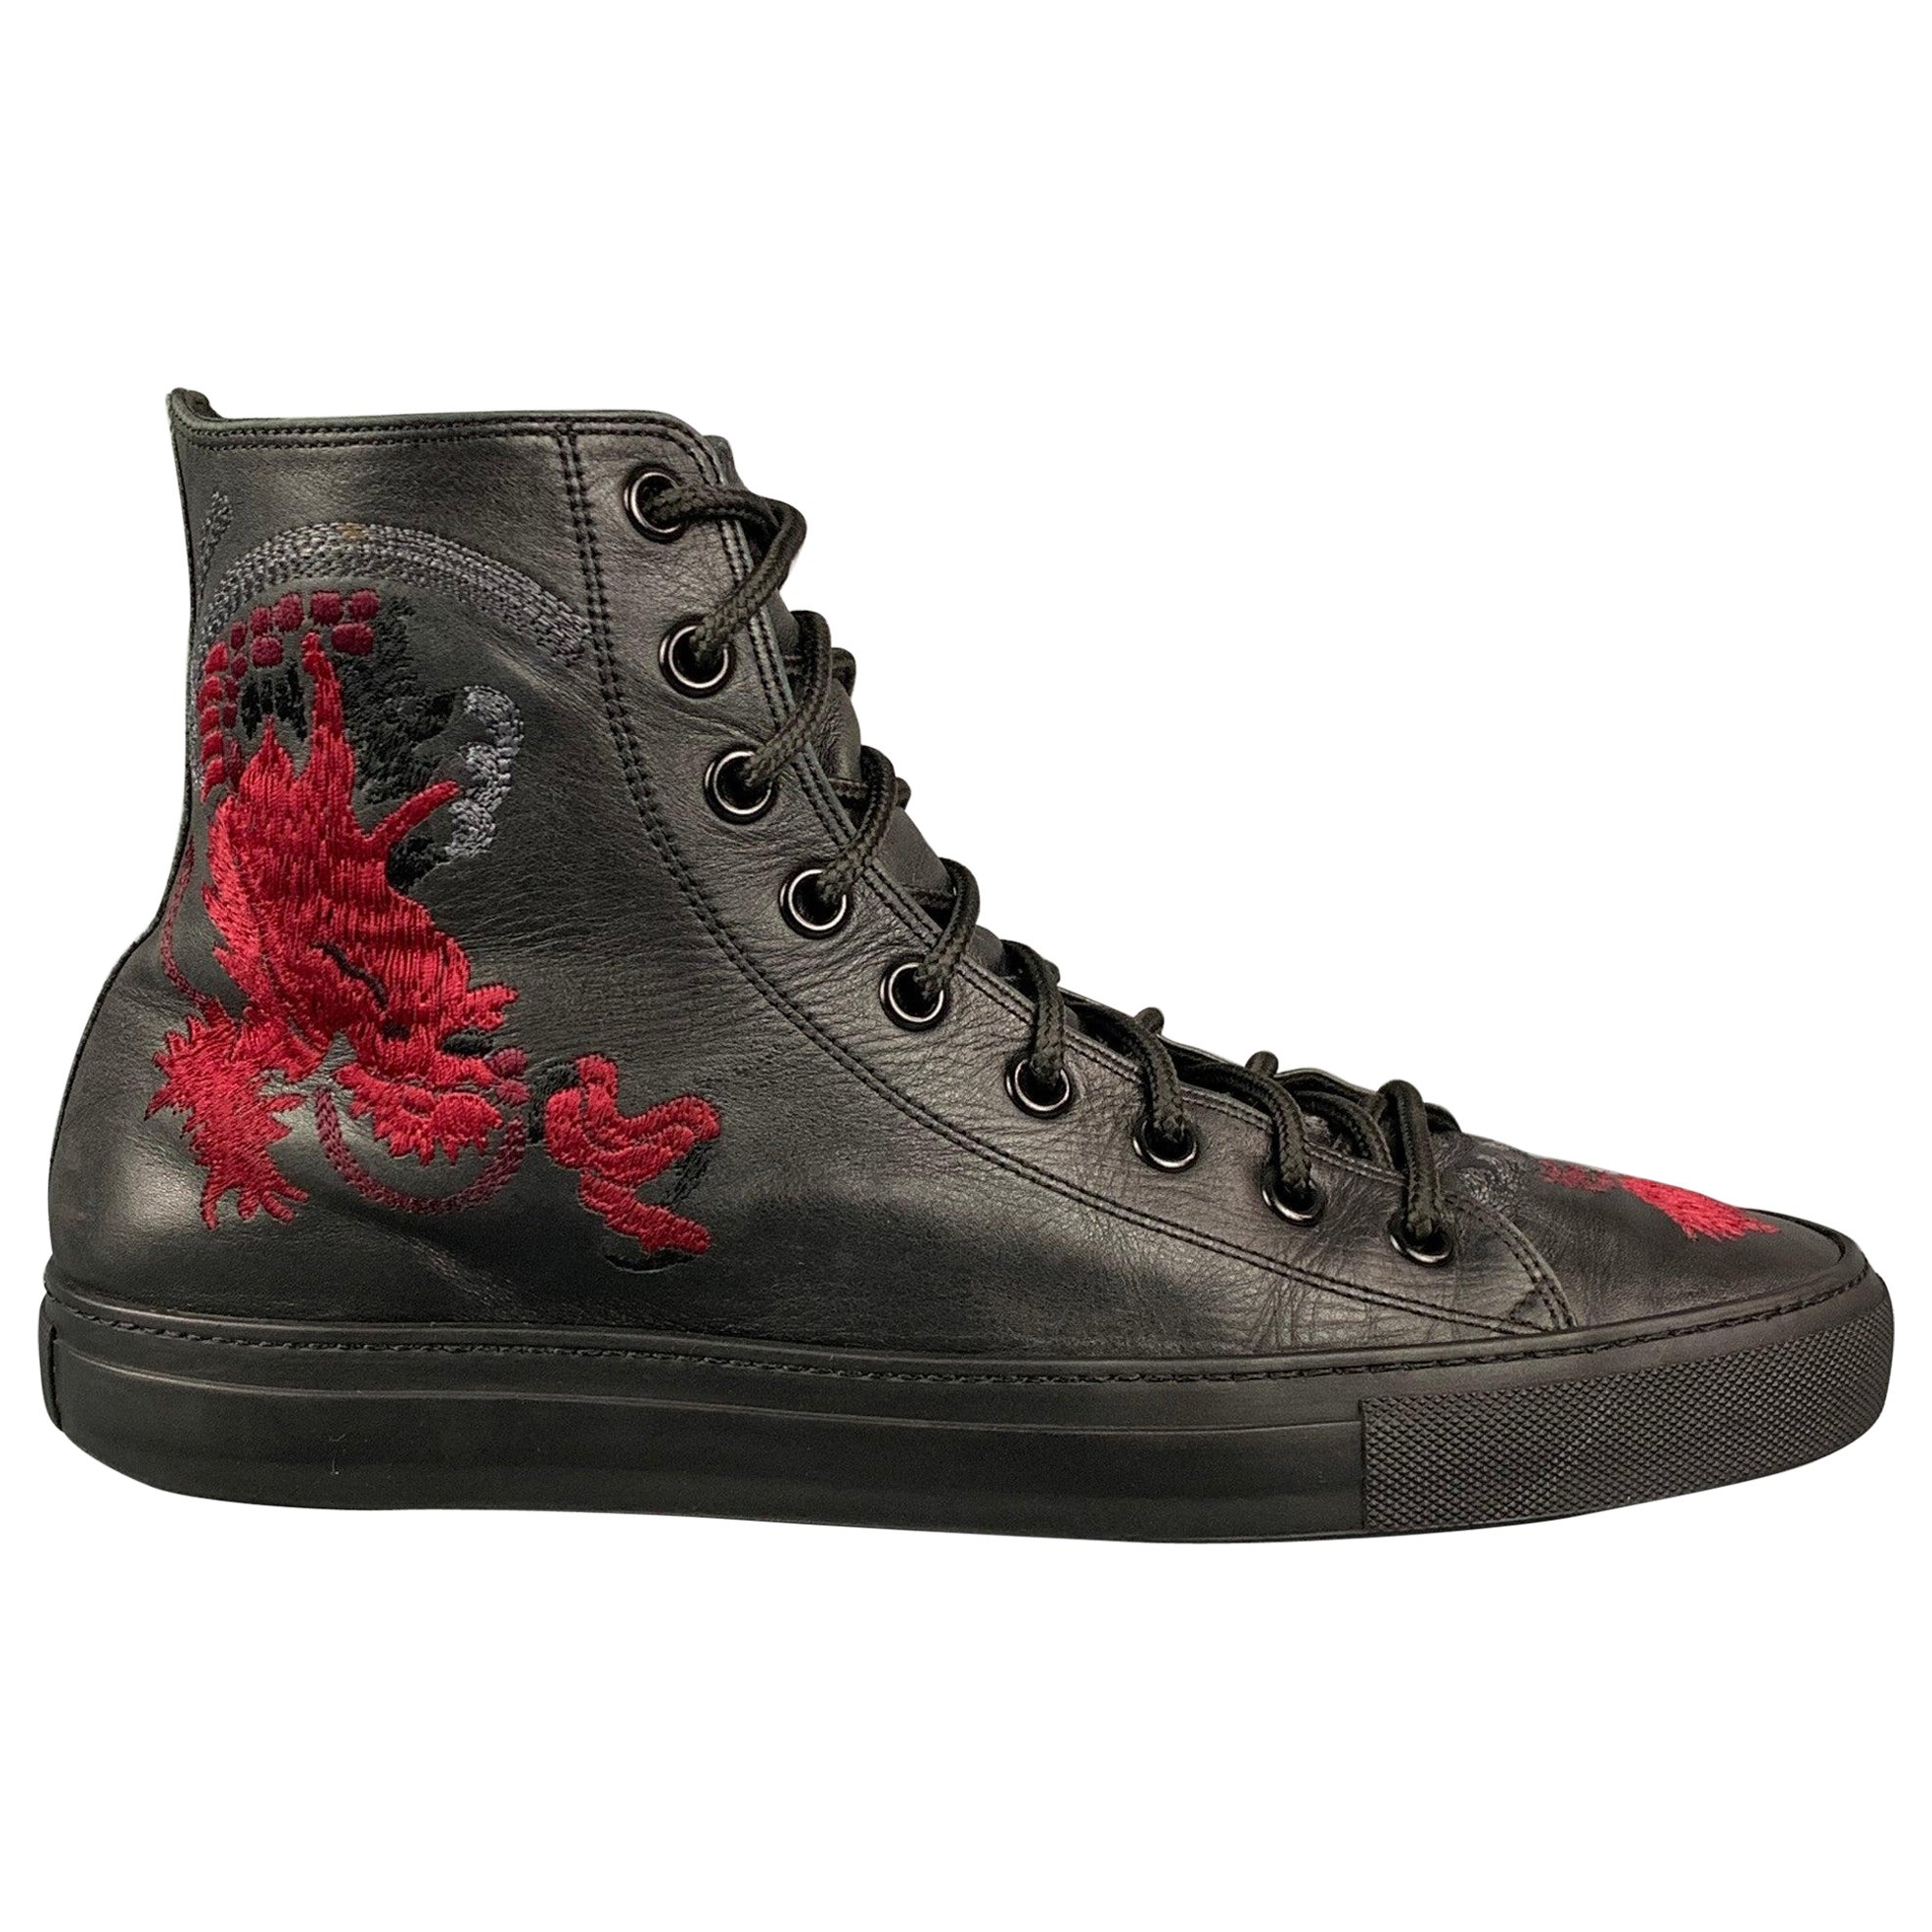 GUCCI by TOM FORD SS 2001 Size 12 Black Dragon Print Leather High Top Sneakers For Sale